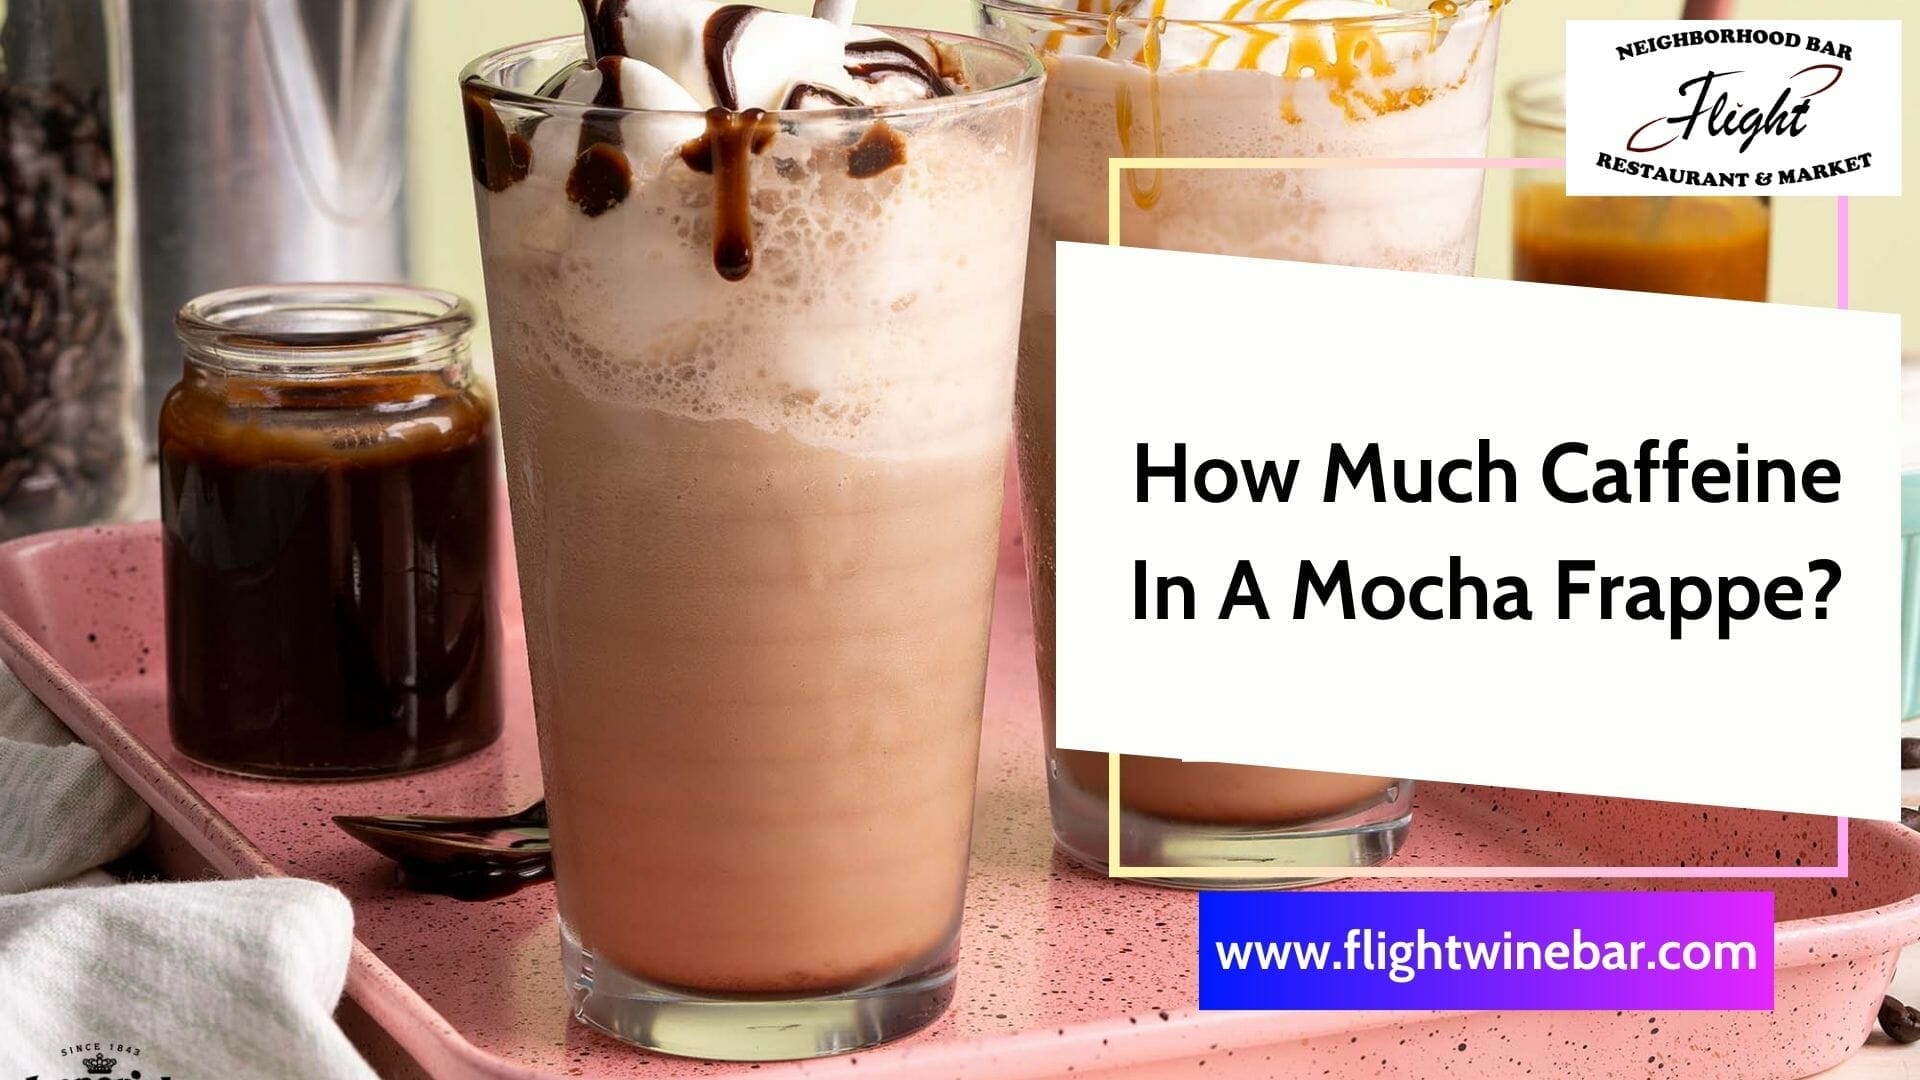 How Much Caffeine In A Mocha Frappe